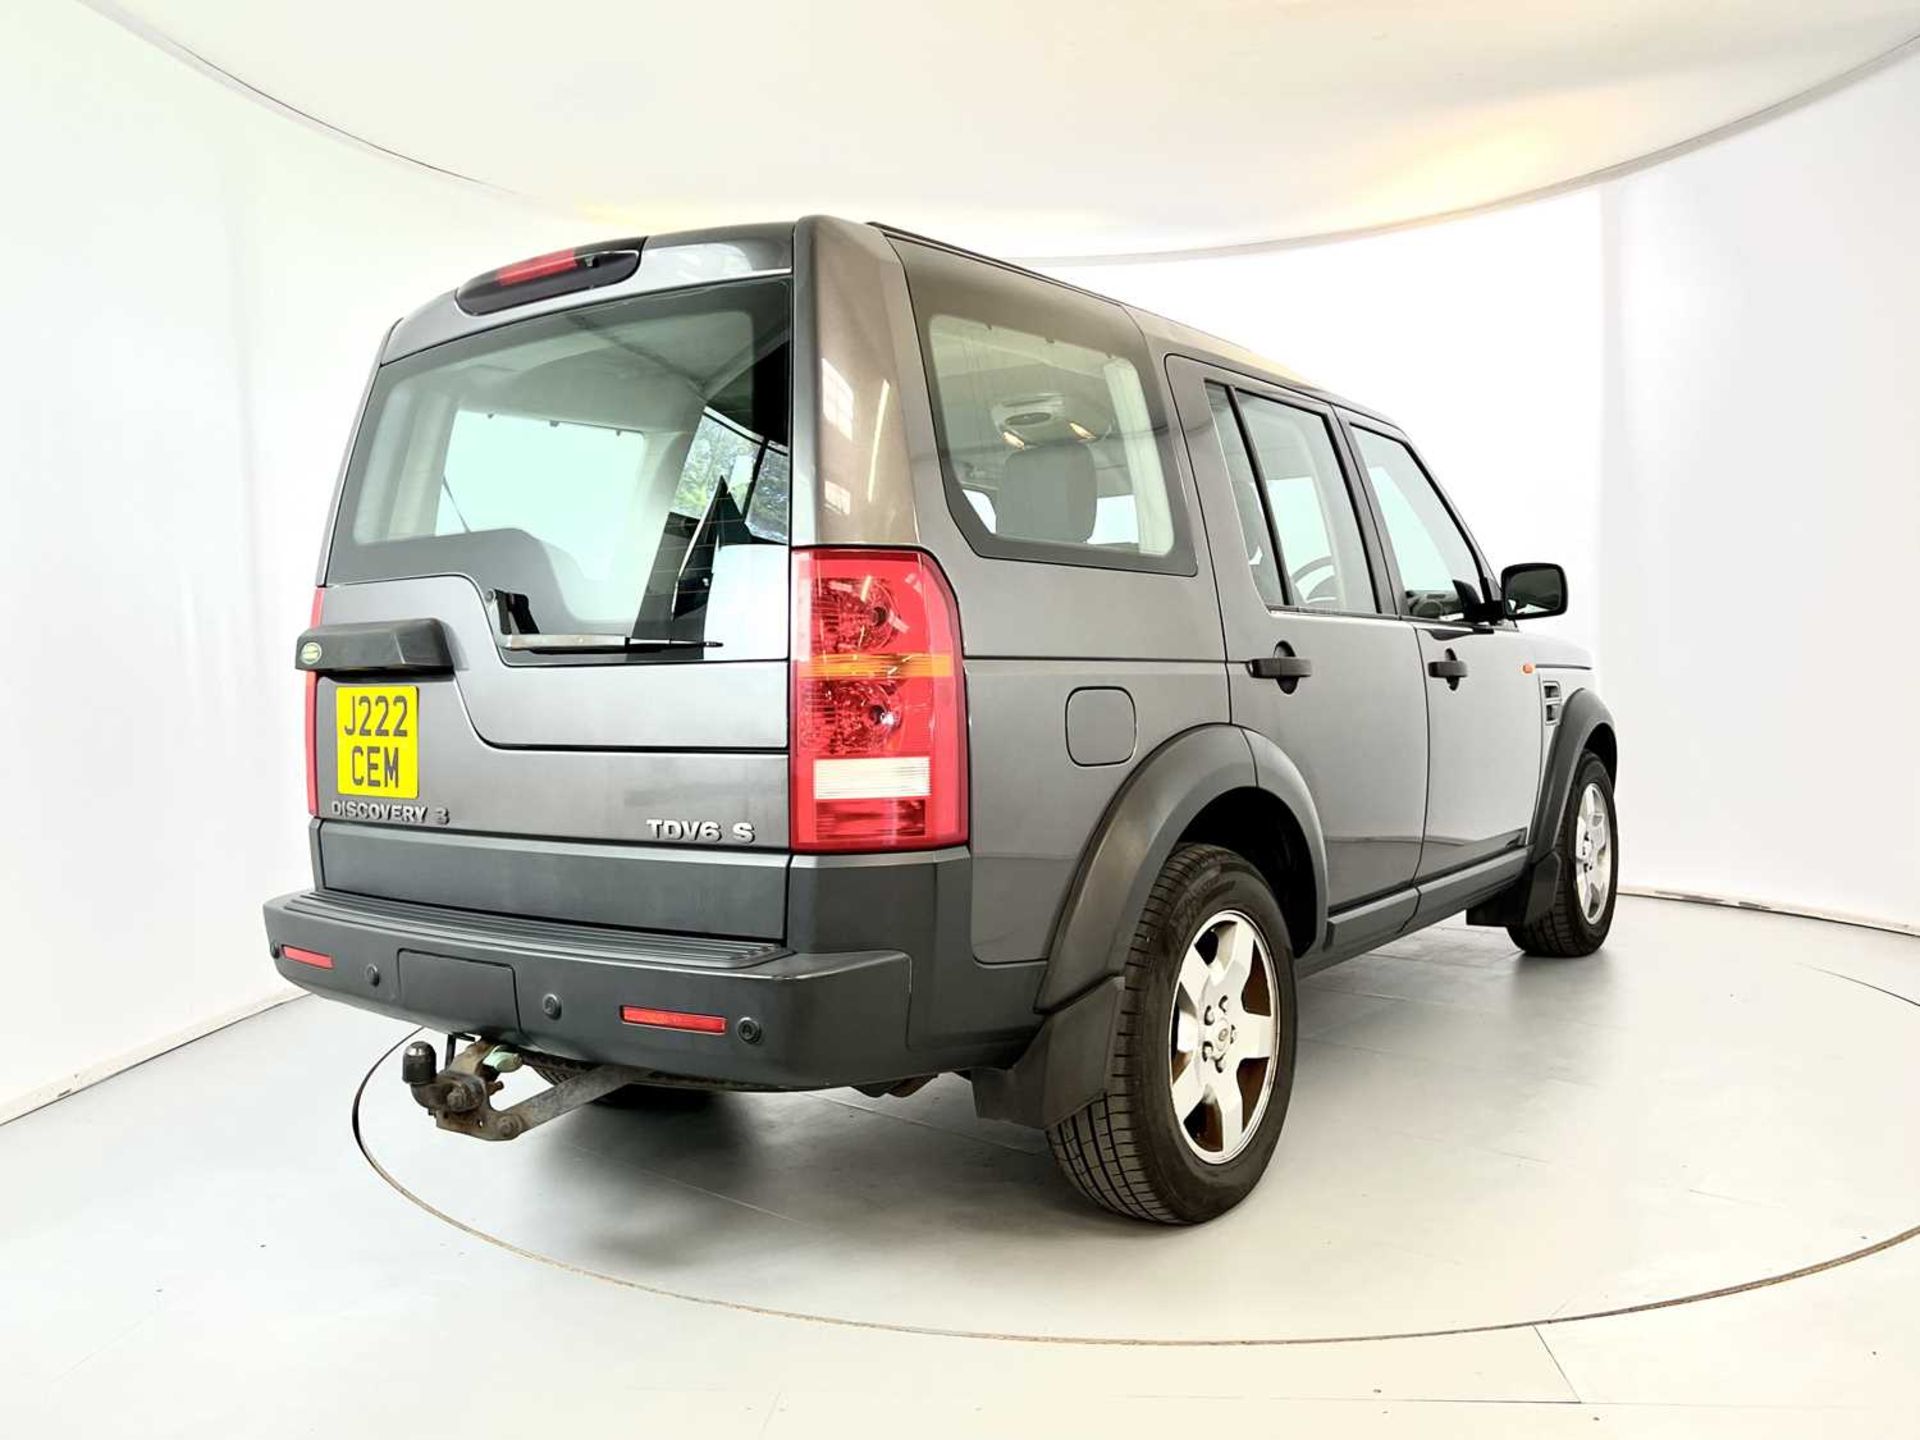 2005 Land Rover Discovery - Image 9 of 36